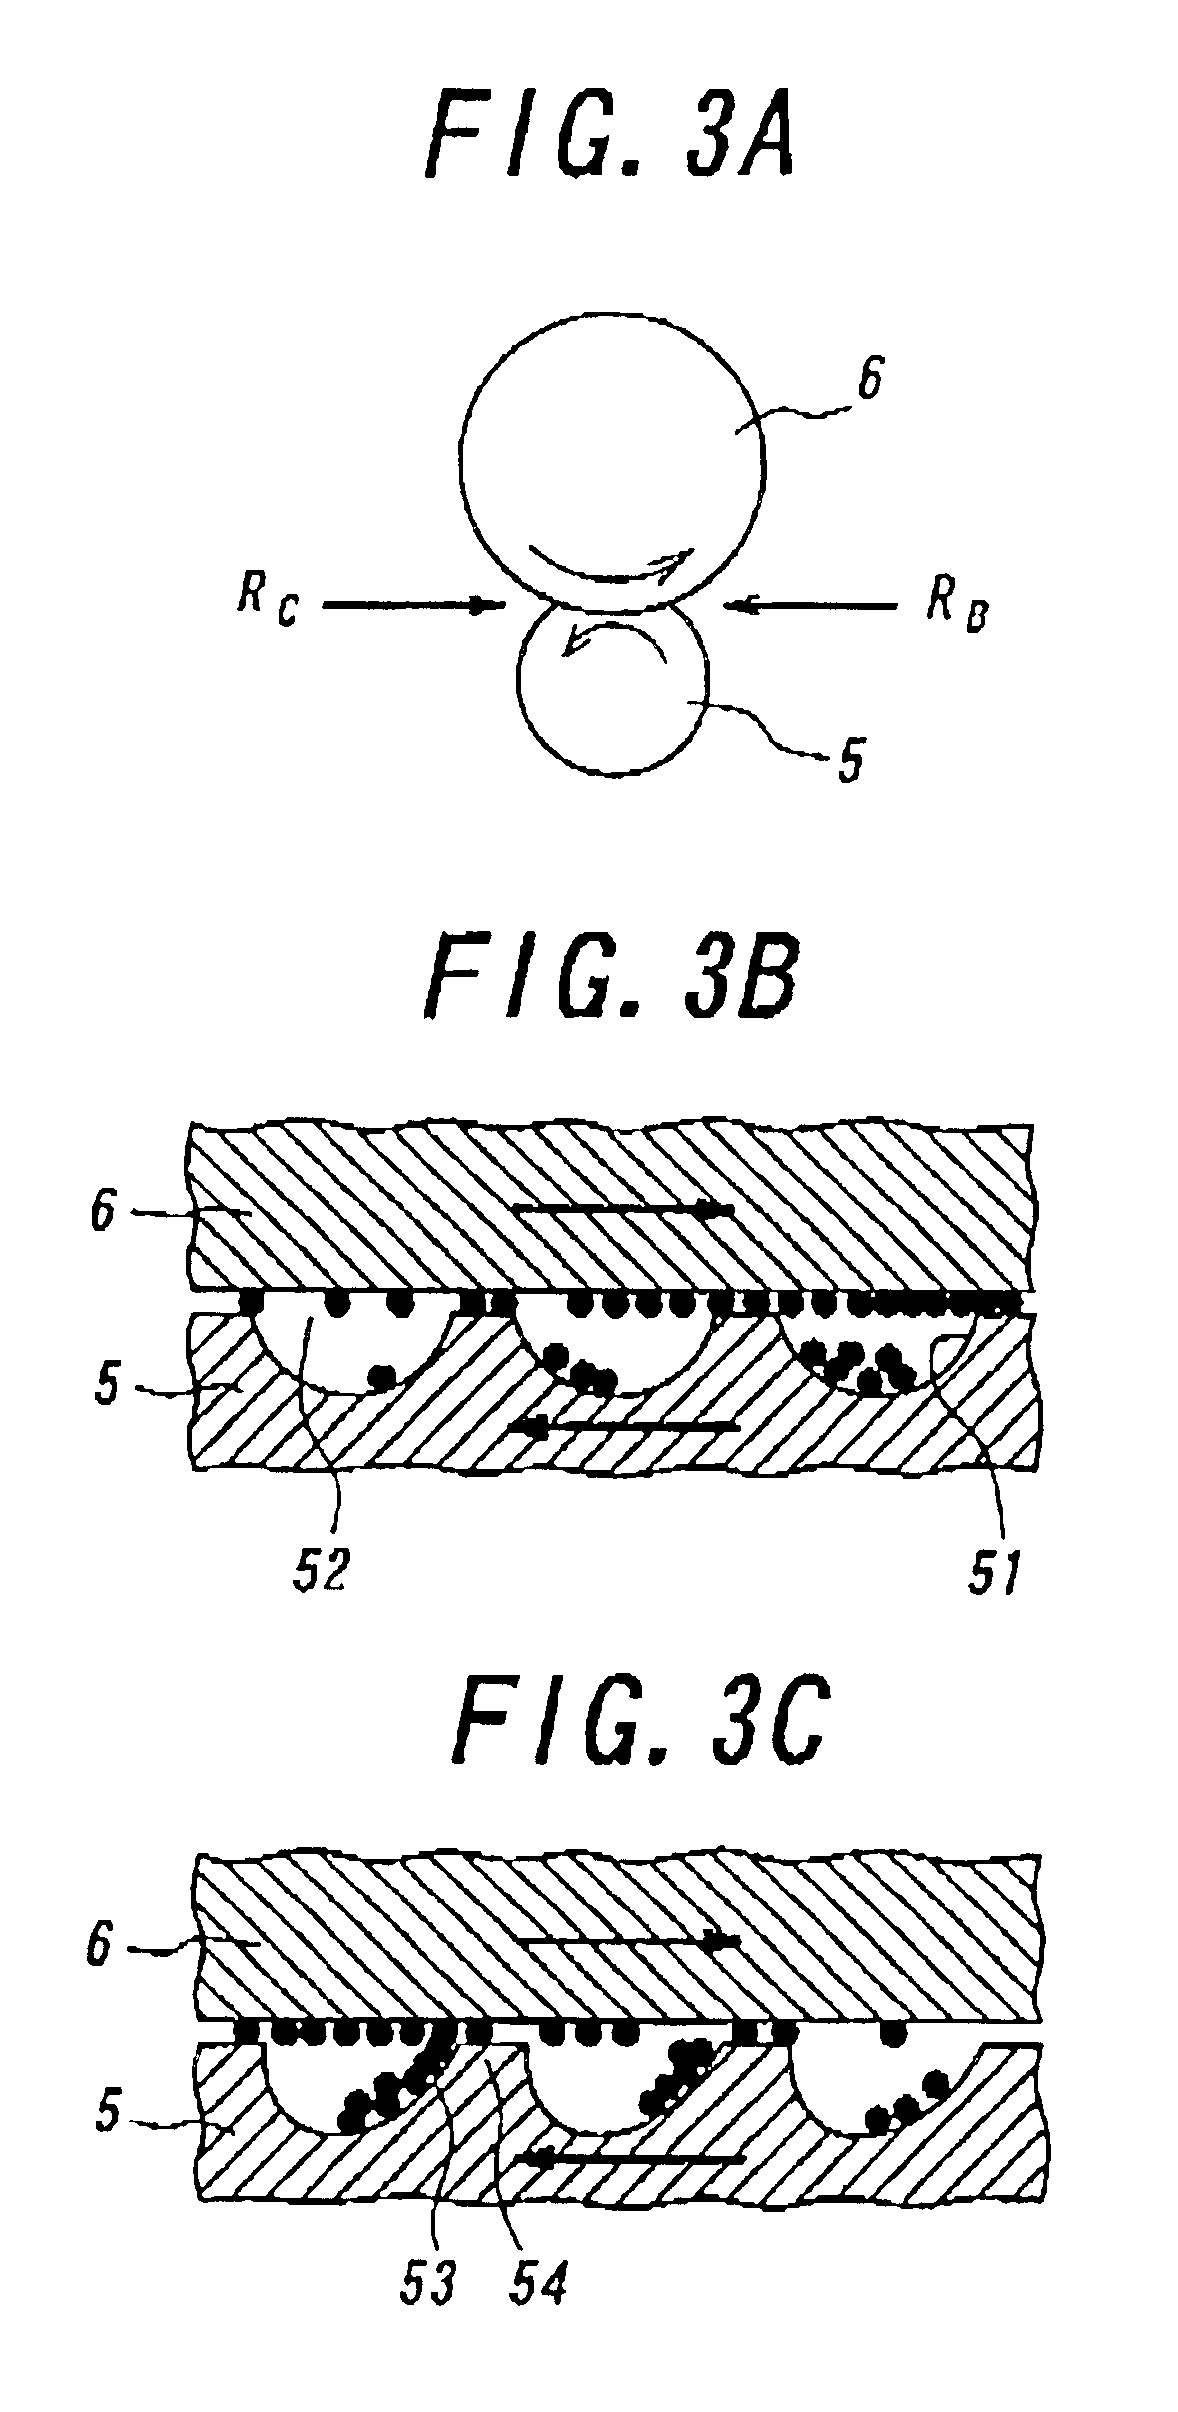 Foamed elastic member for use in image forming apparatus